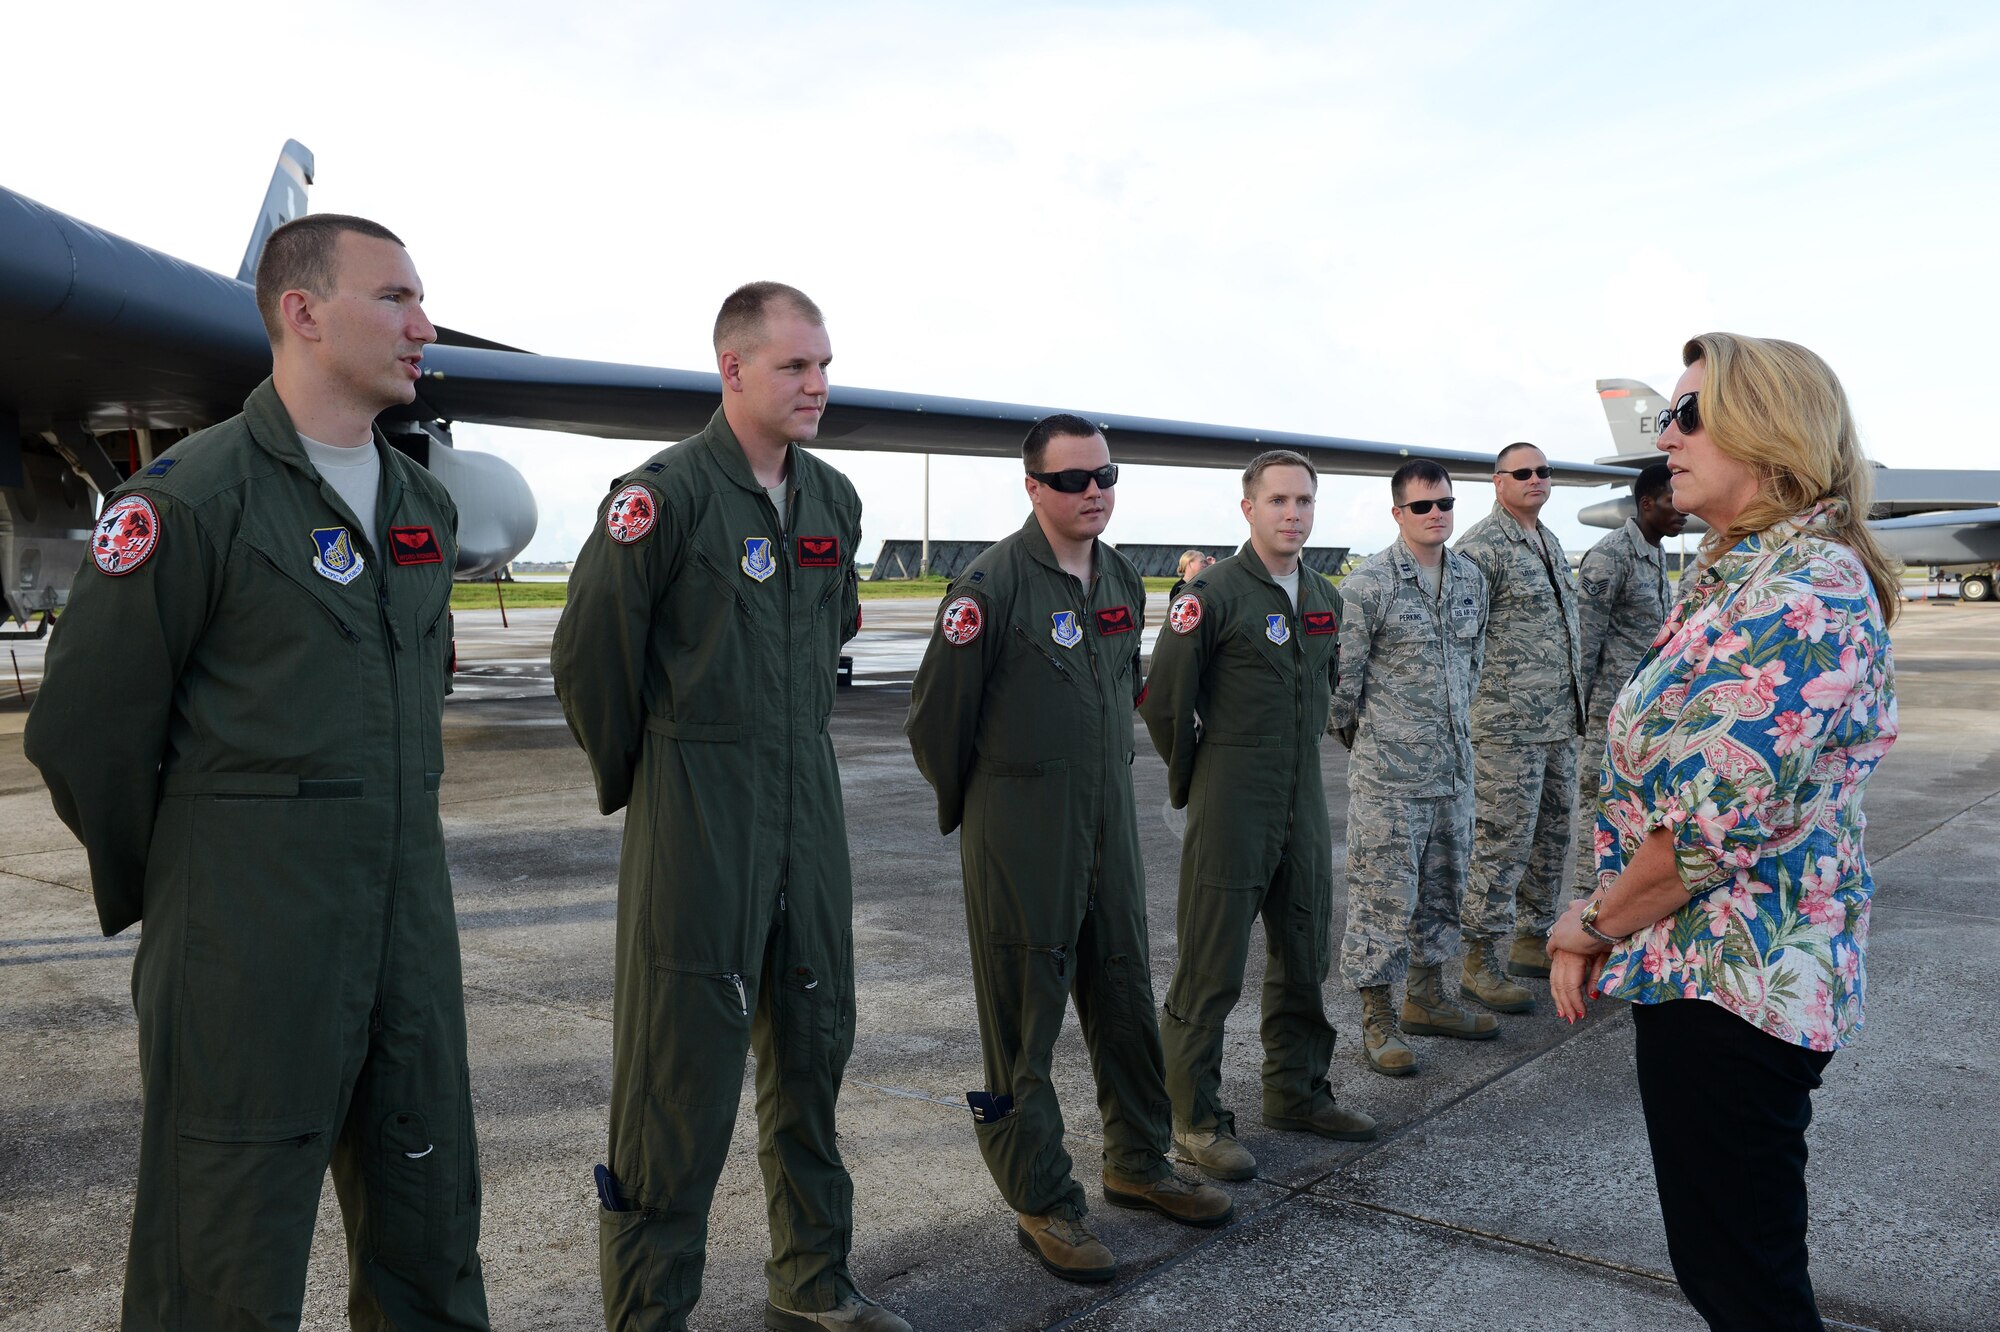 Secretary of the Air Force Deborah Lee James speaks with B-1B Lancer crew members and maintainers during a visit Aug. 30, 2016, at Andersen Air Force Base, Guam. During her visit, James learned more about the mission of the 34th Expeditionary Bomb Squadron while they are deployed executing the Continuous Bomber Presence mission. (U.S. Air Force photo by Airman 1st Class Arielle Vasquez/Released)